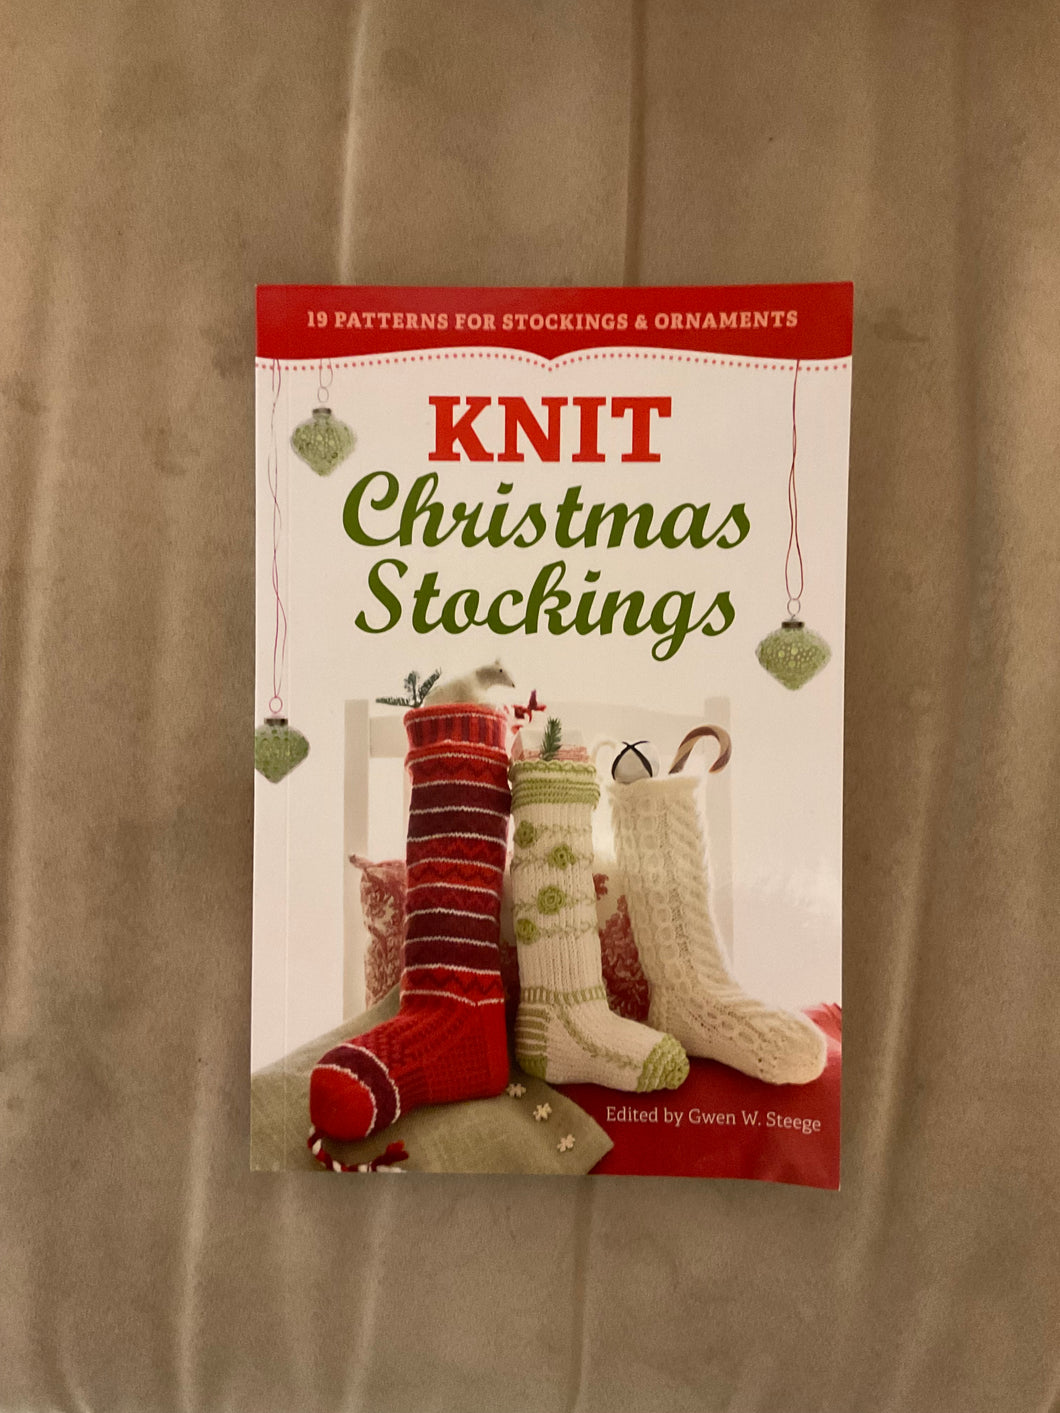 Knit Christmas Stockings by Gwen W. Steege